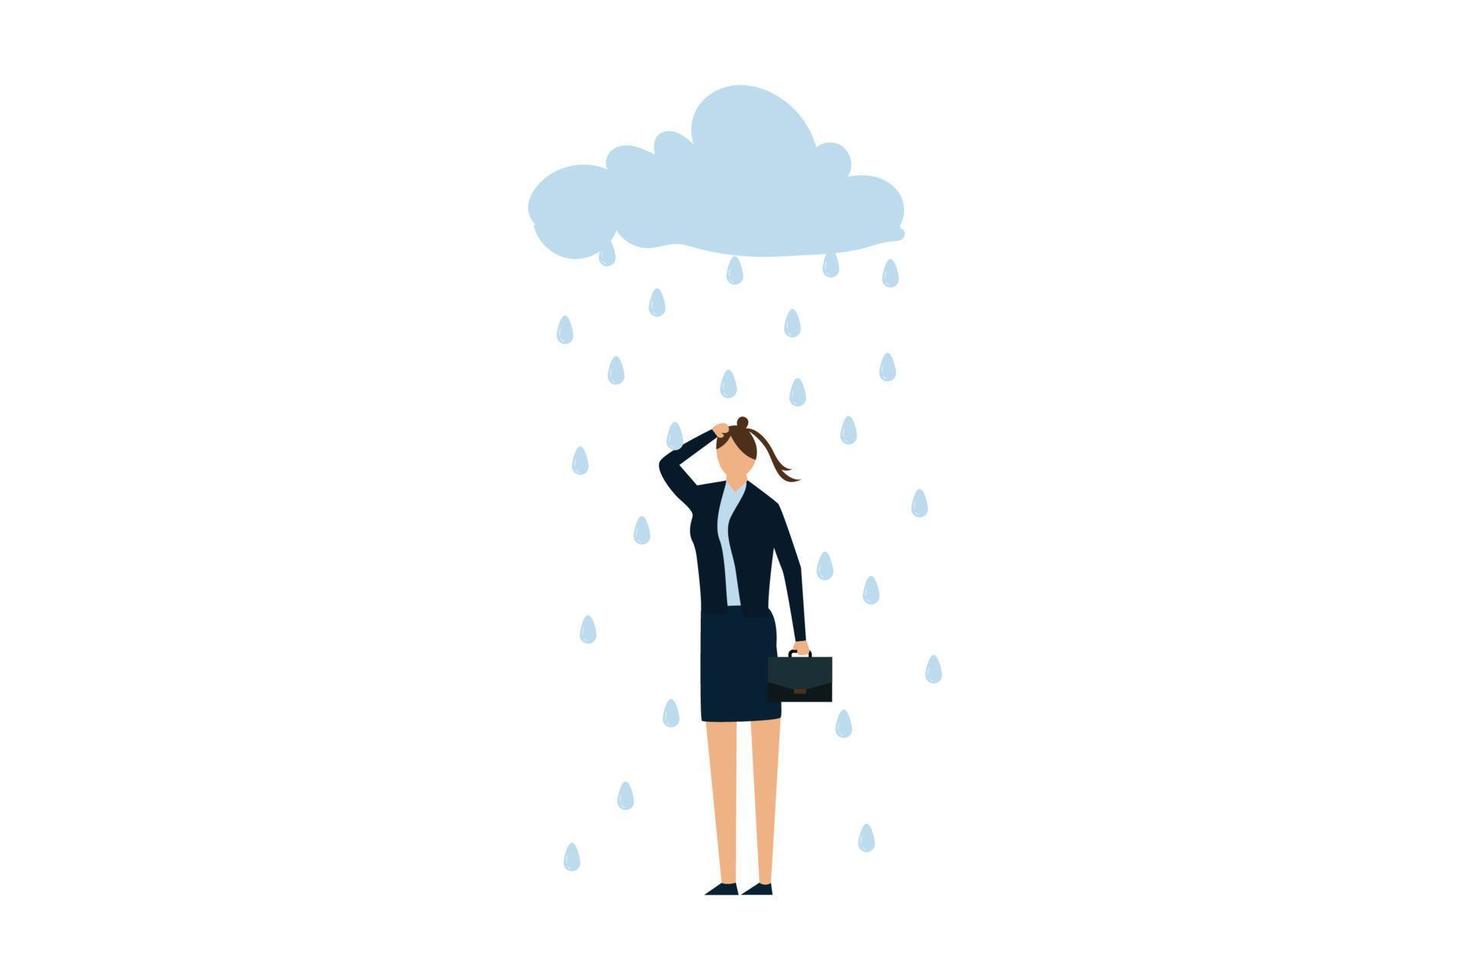 Workload and stress causing depression in office worker, sadness depressed young lady in office uniform with cloud and rain metaphor of mind trouble. vector